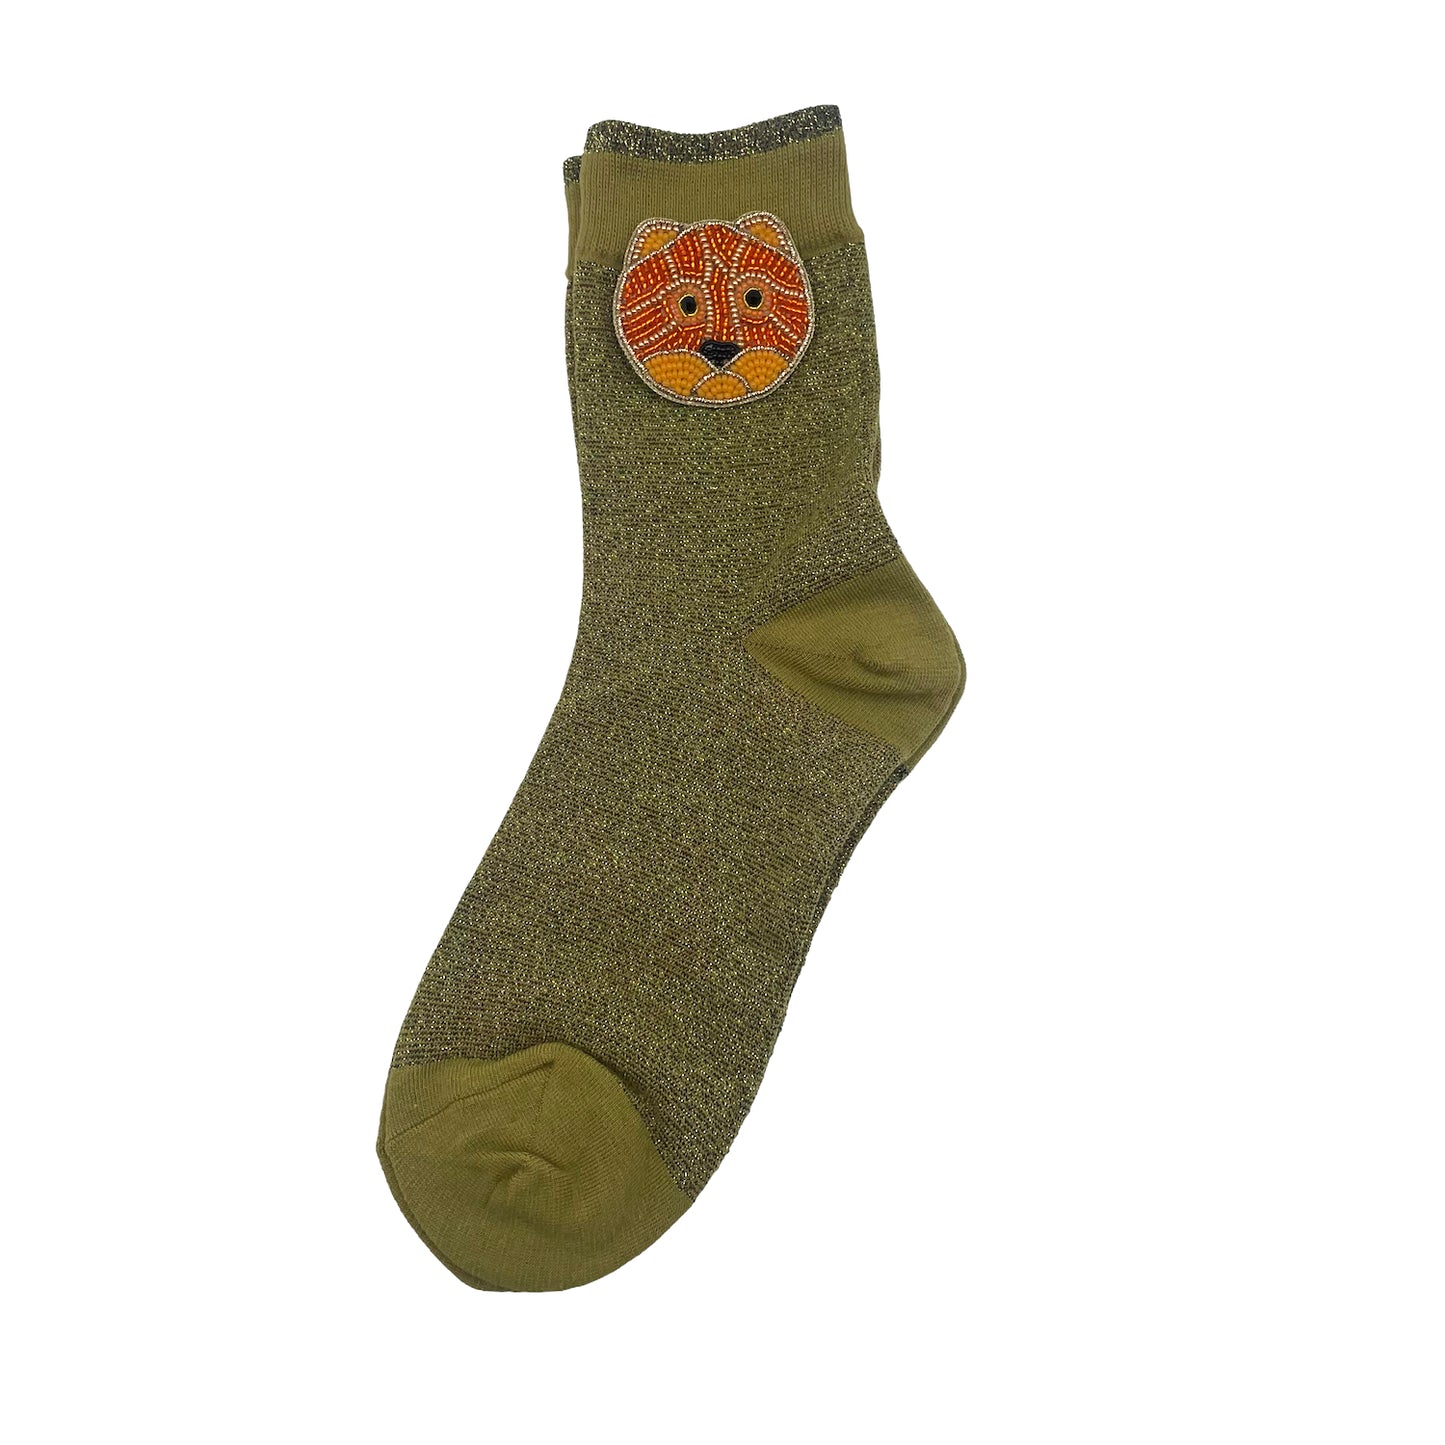 Tokyo socks in olive with a cat brooch